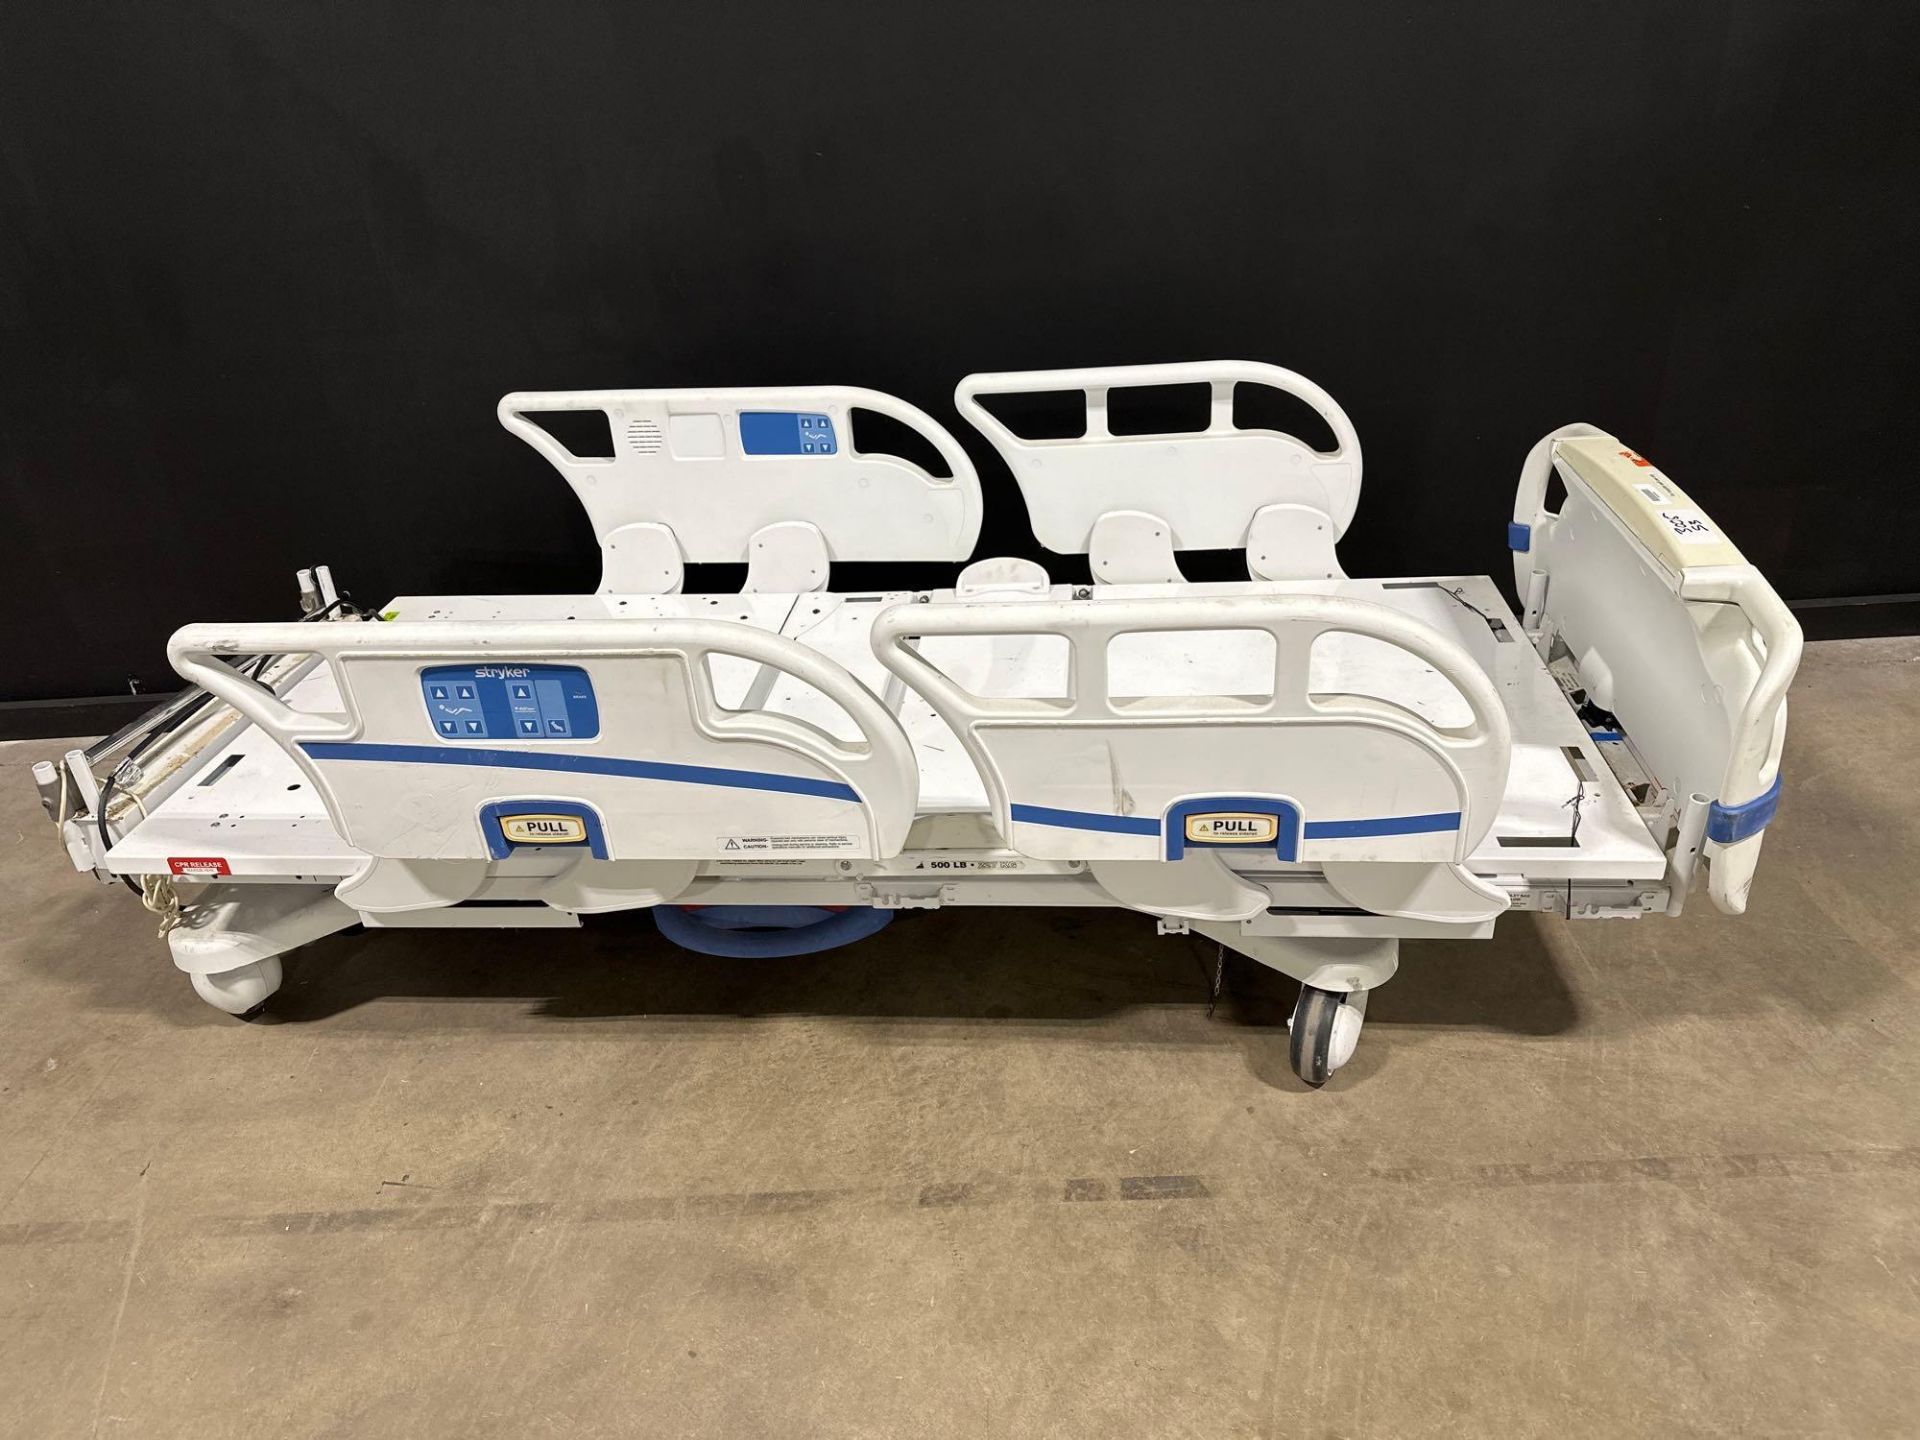 STRYKER 3005 S3 HOSPITAL BED - Image 3 of 4